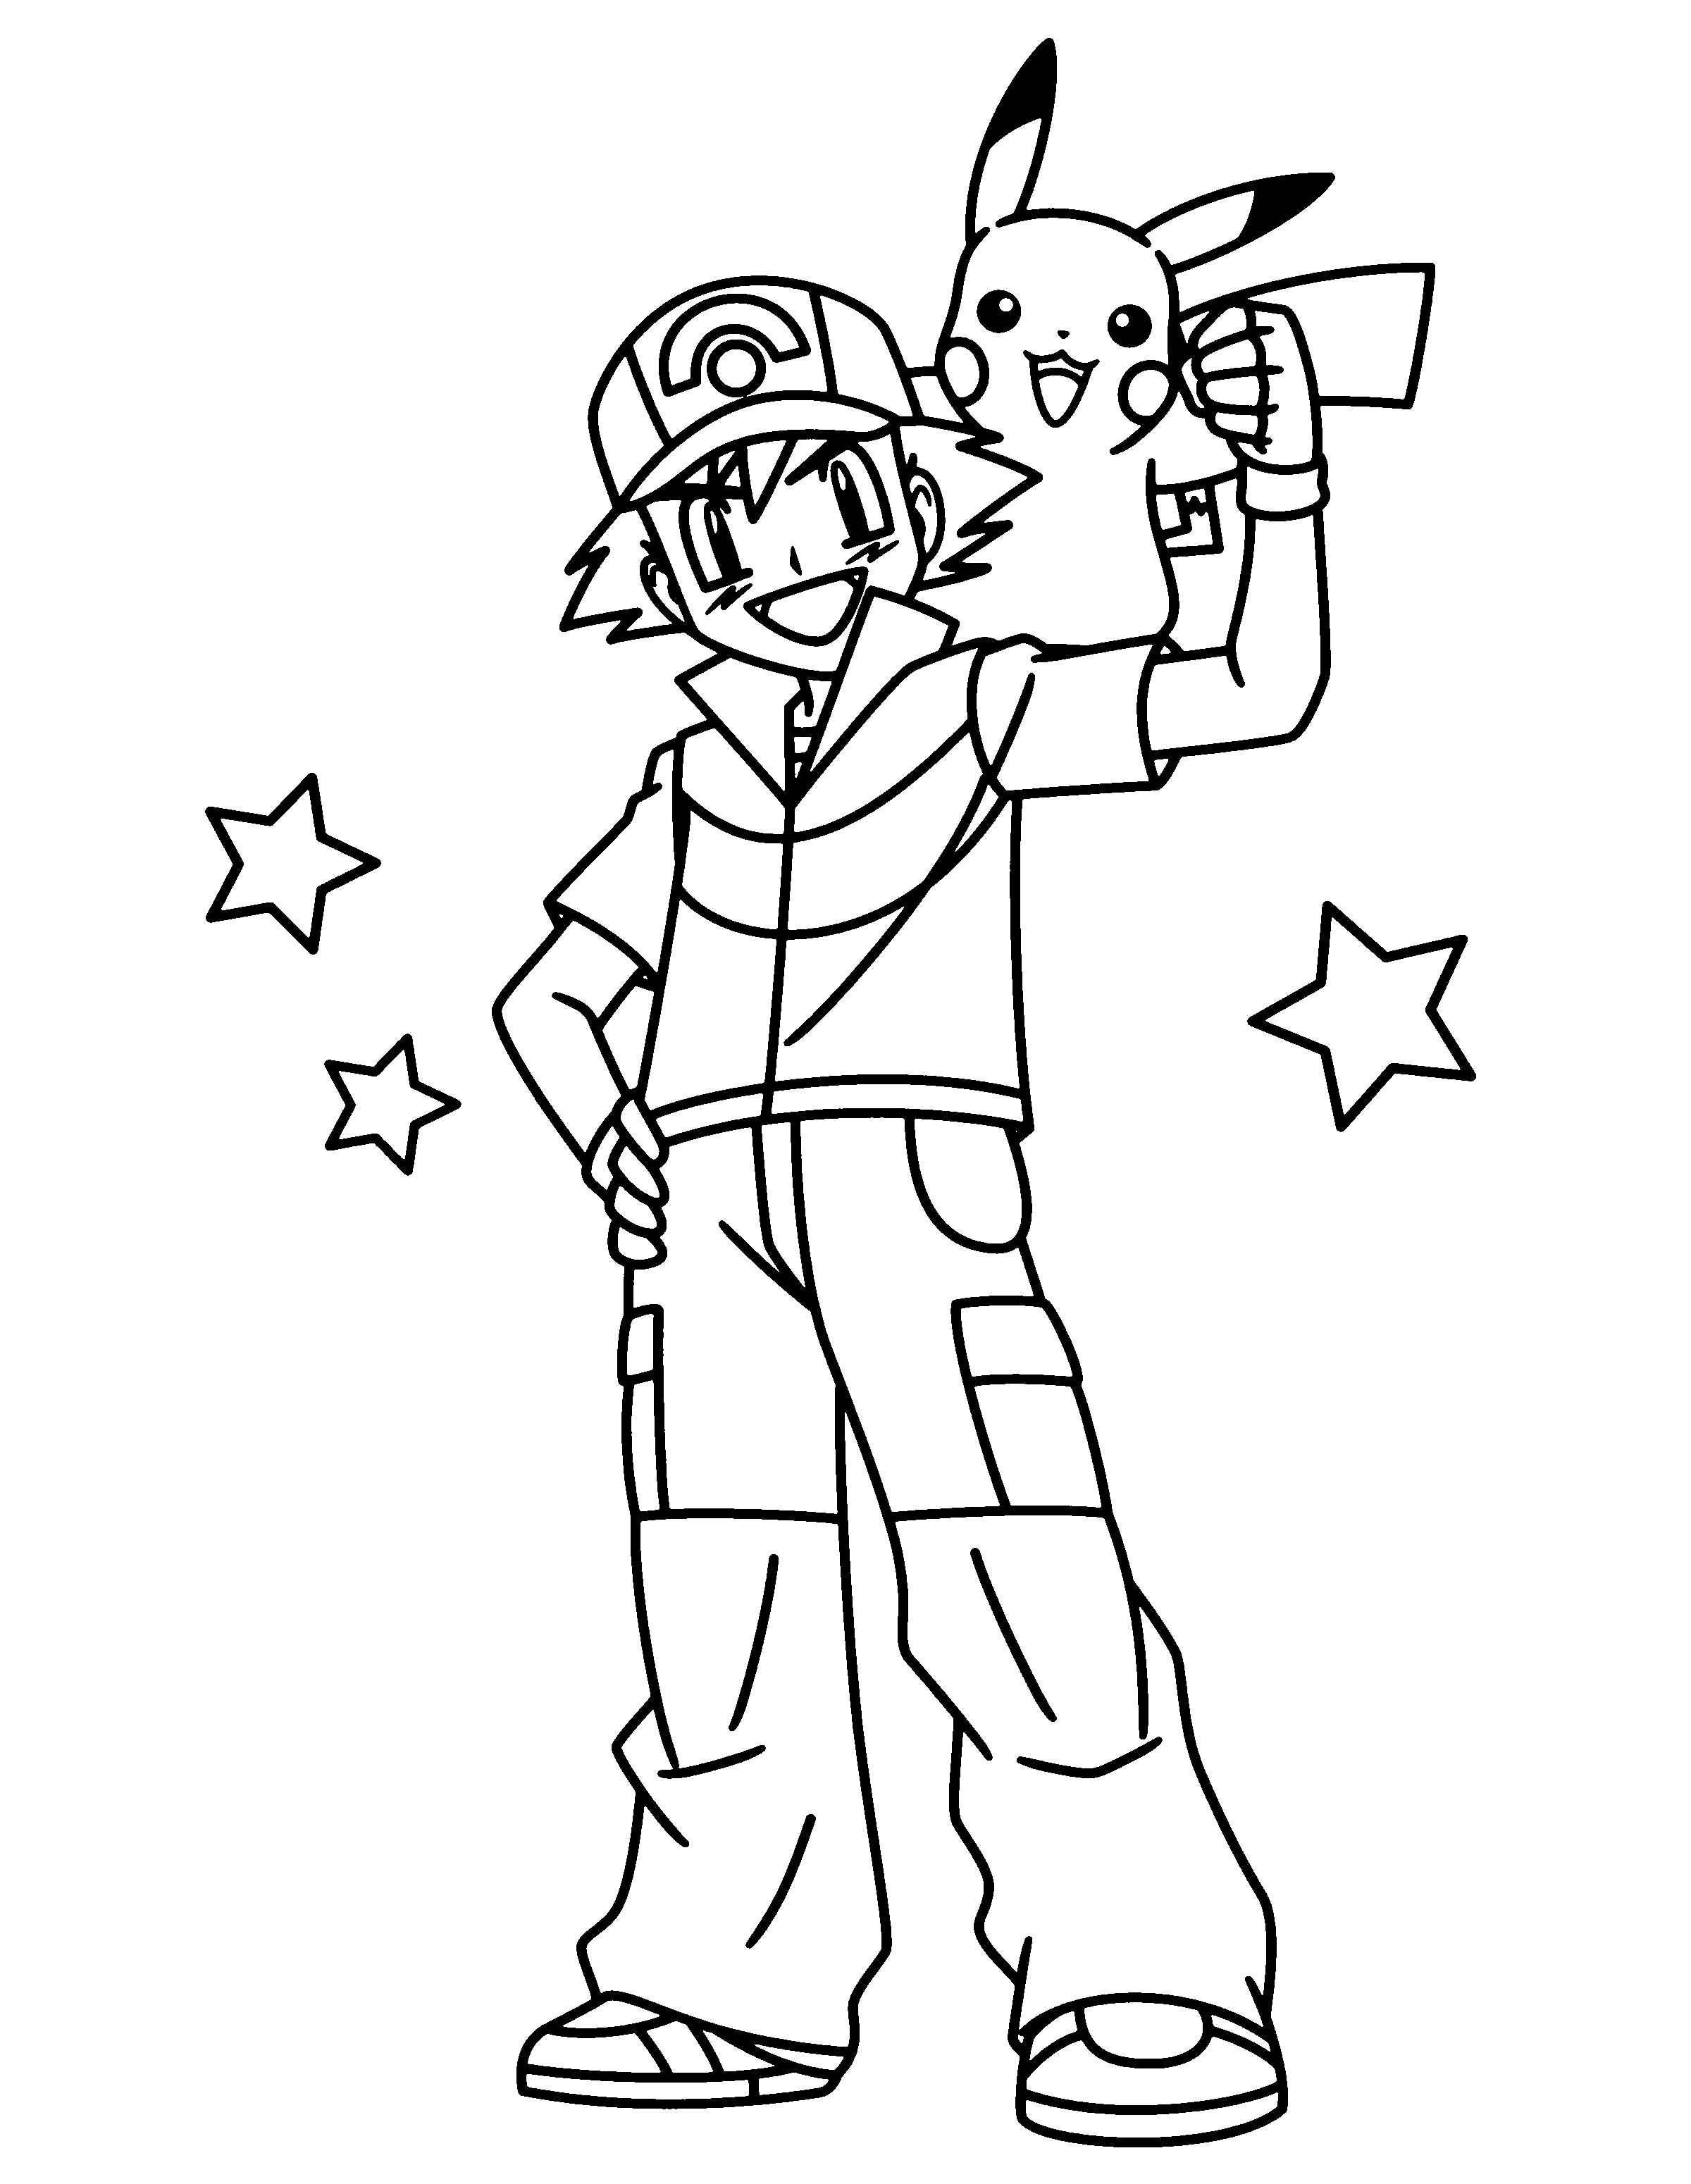 Pokemon Coloring Pages Ash And Pikachu - HiColoringPages